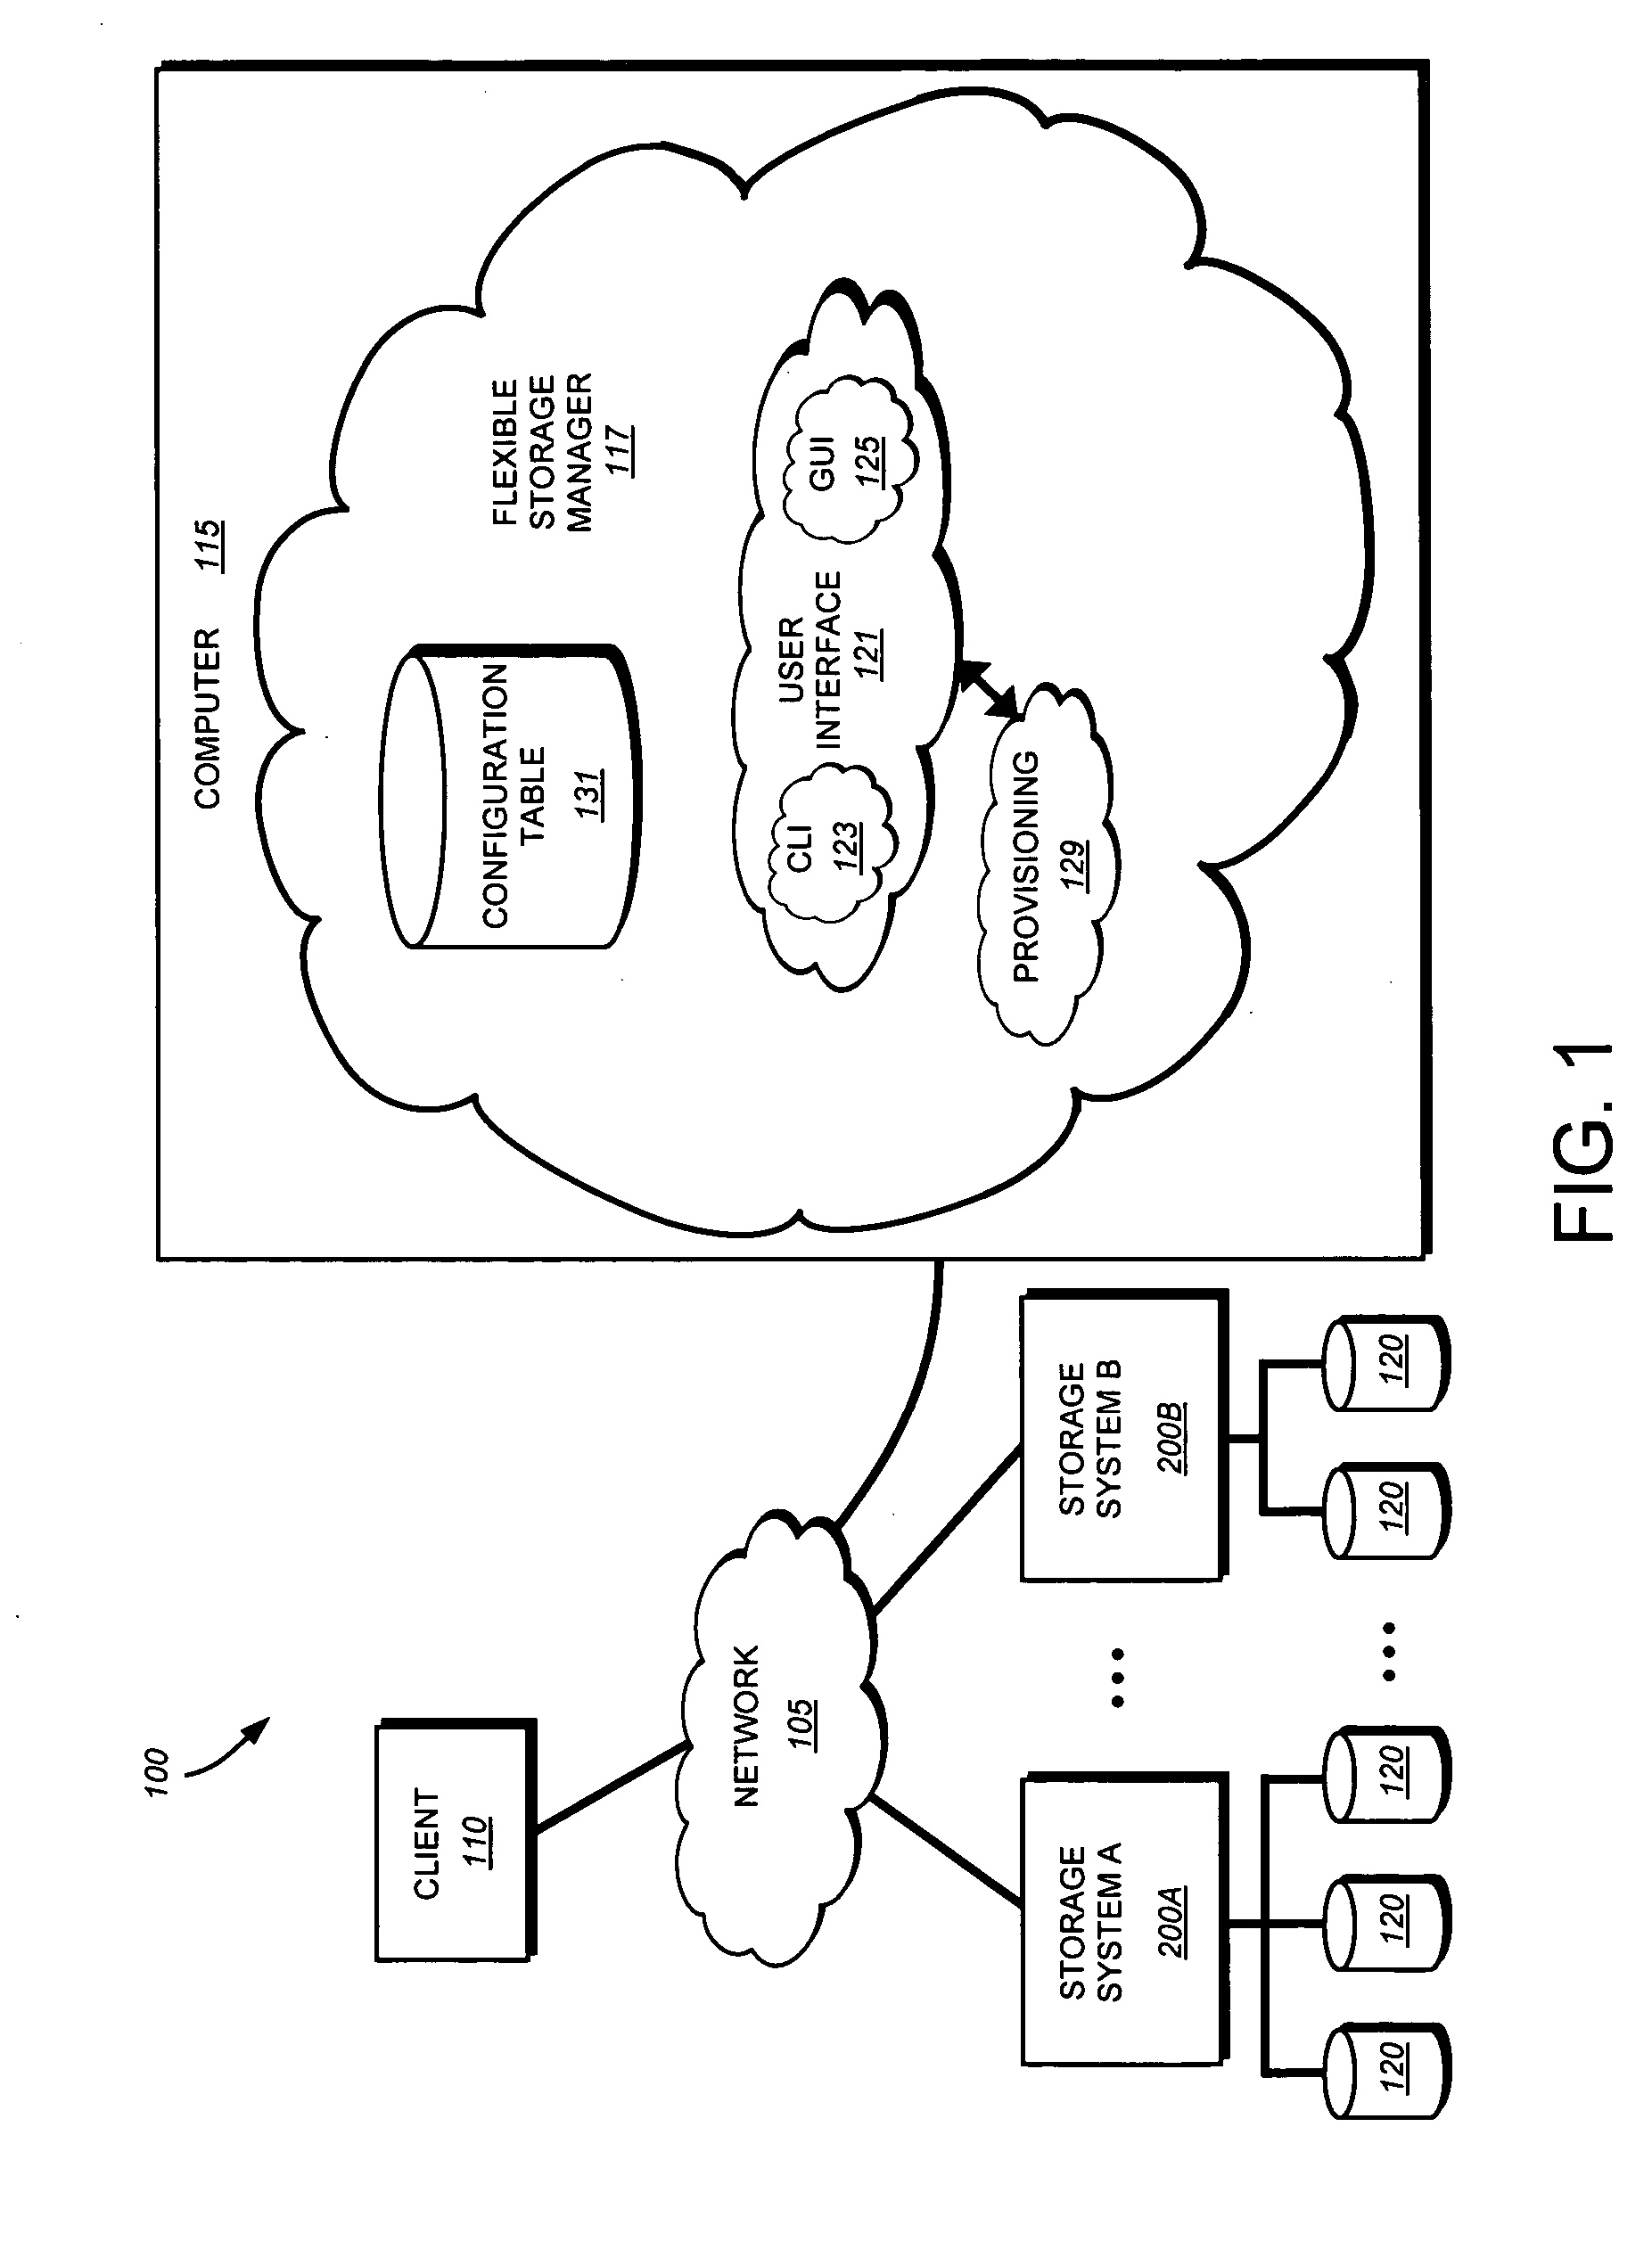 System and method for intelligent provisioning of storage across a plurality of storage systems